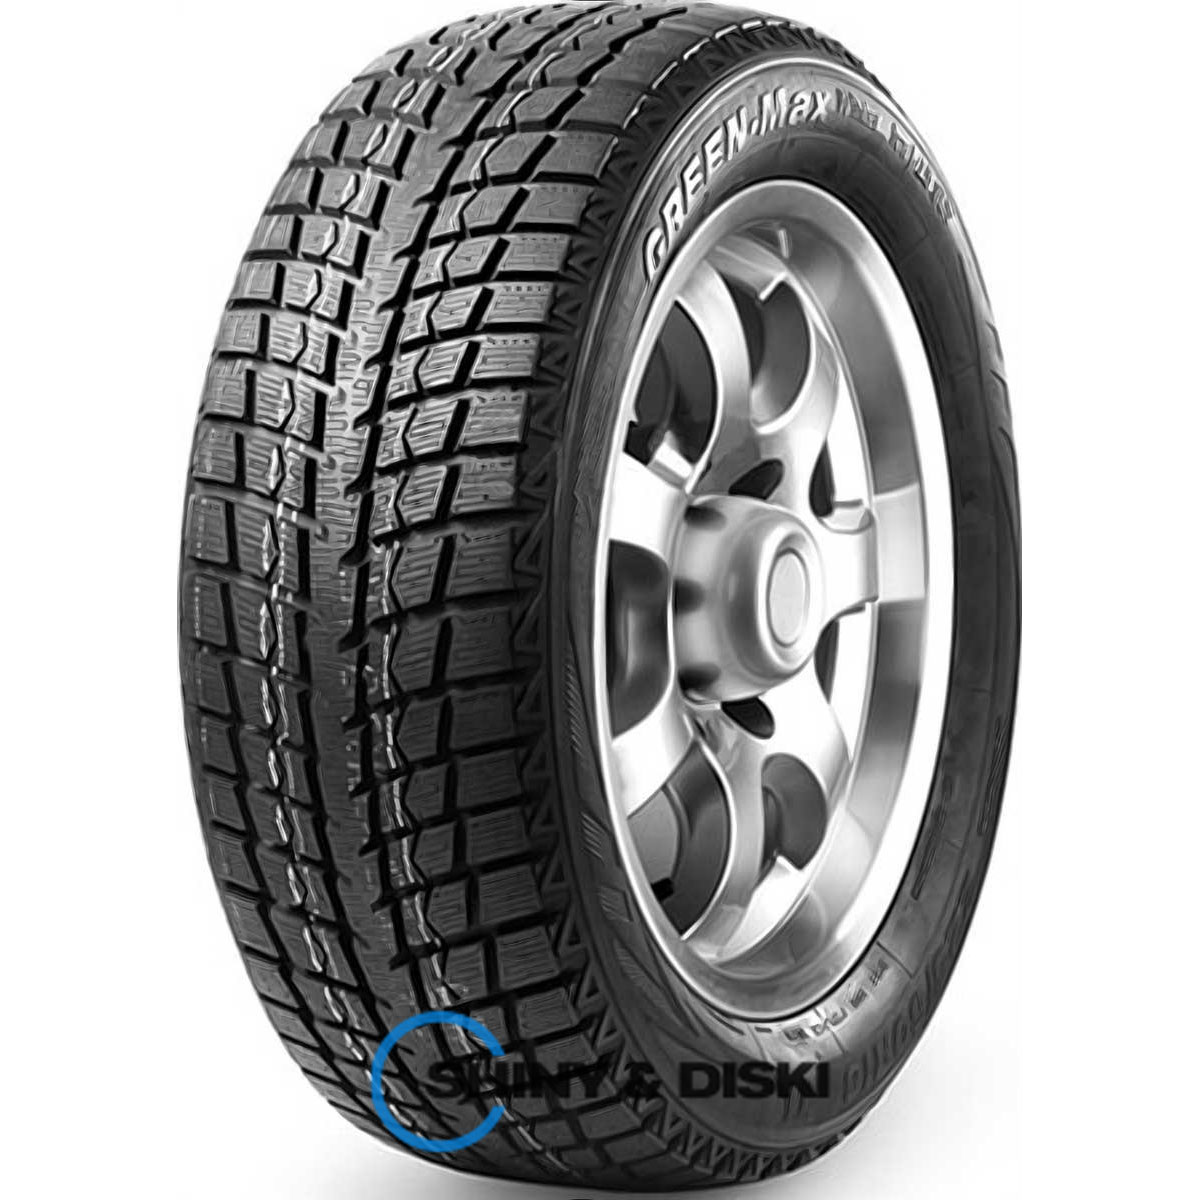 ling long green-max winter ice i-15 185/65 r15 92t